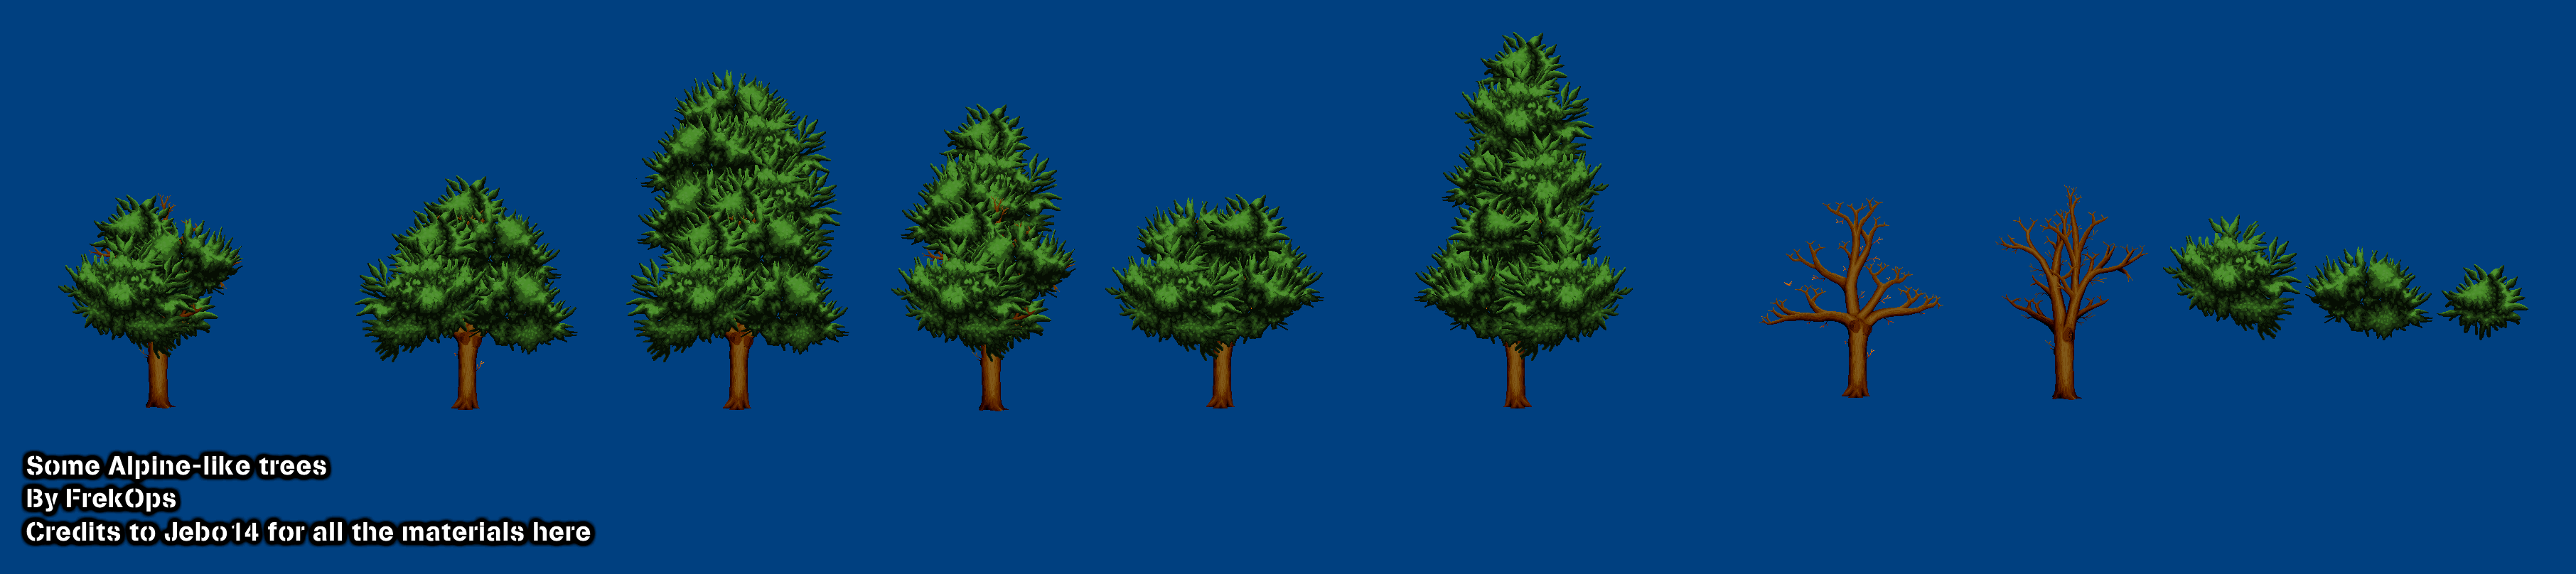 treees_by_freak_ops-dc5qrec.png